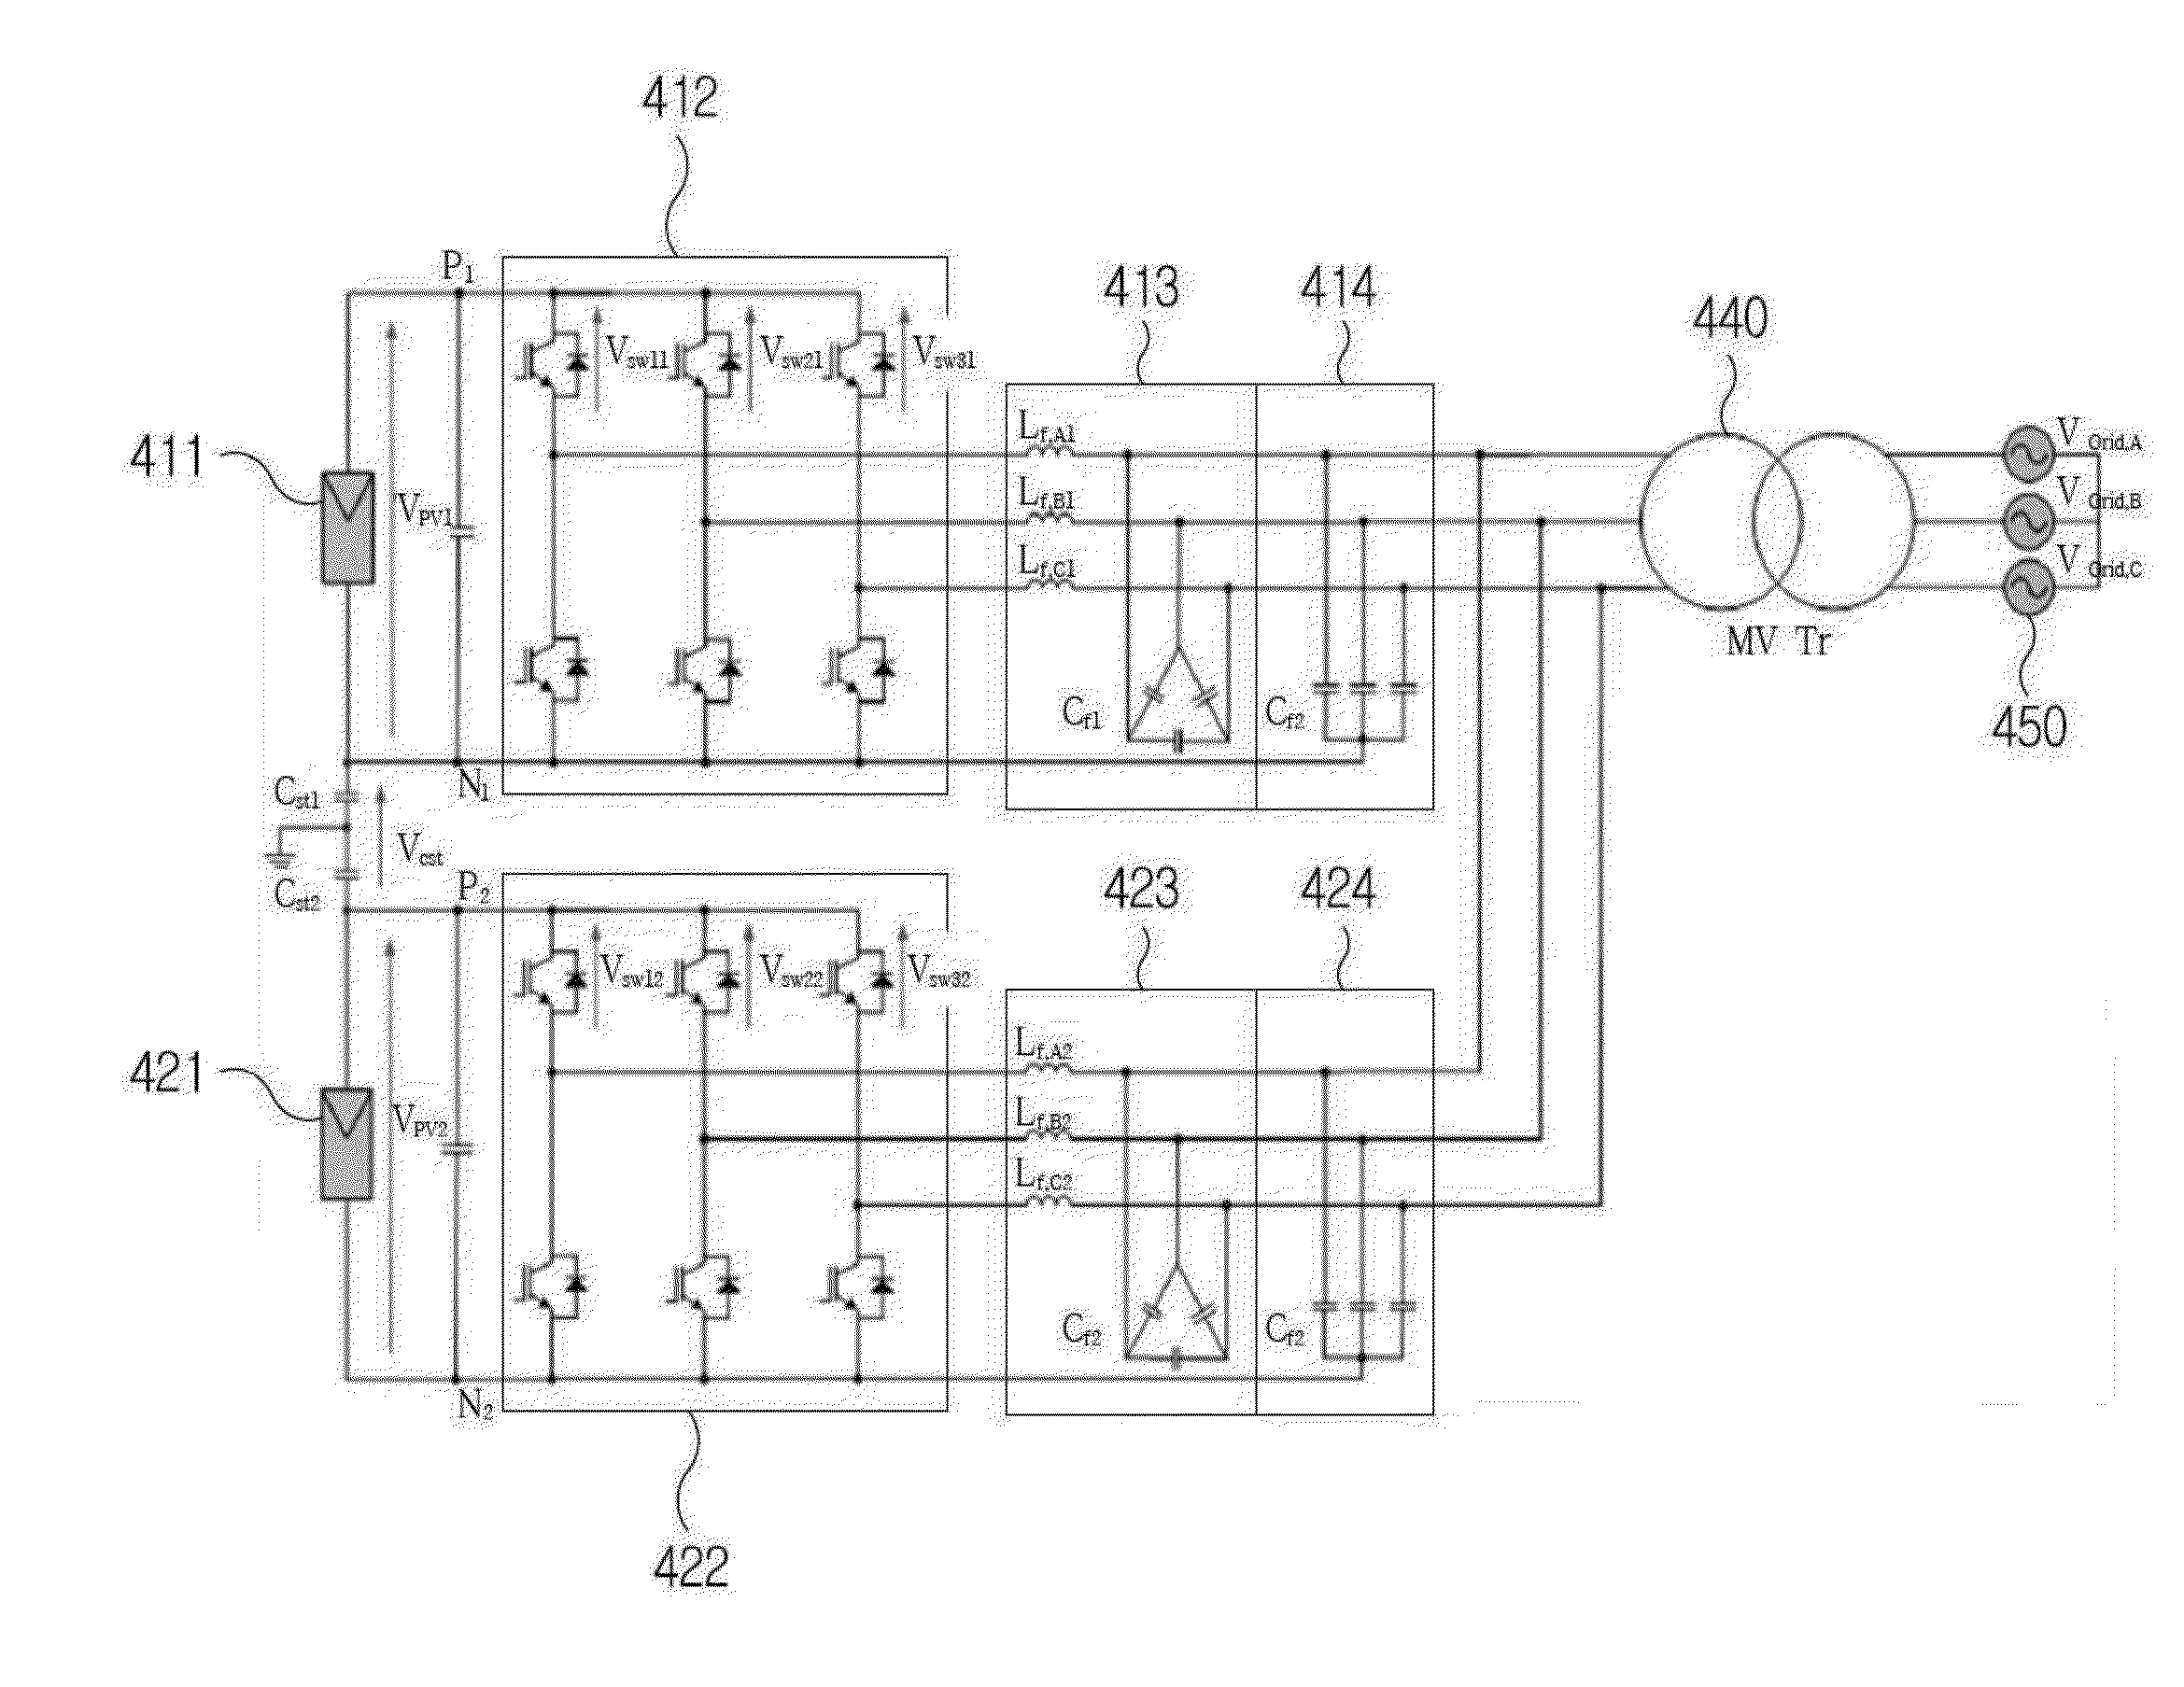 Photovoltaic generation system using parallel inverter connected grid